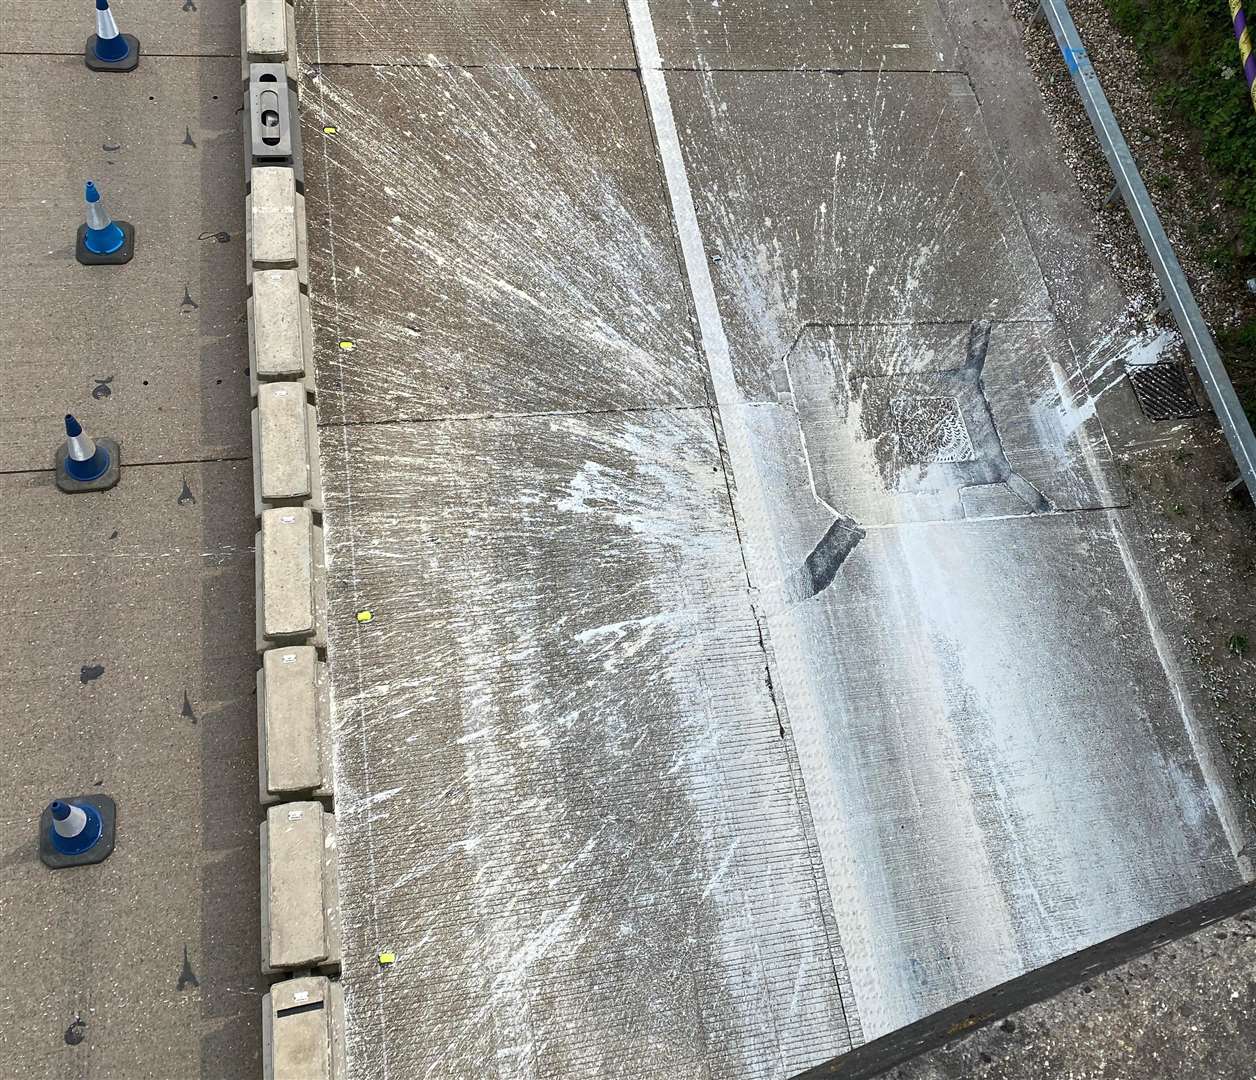 A spillage of white paint has closed a lane of the M20 between Ashford and Maidstone. Picture: National Highways